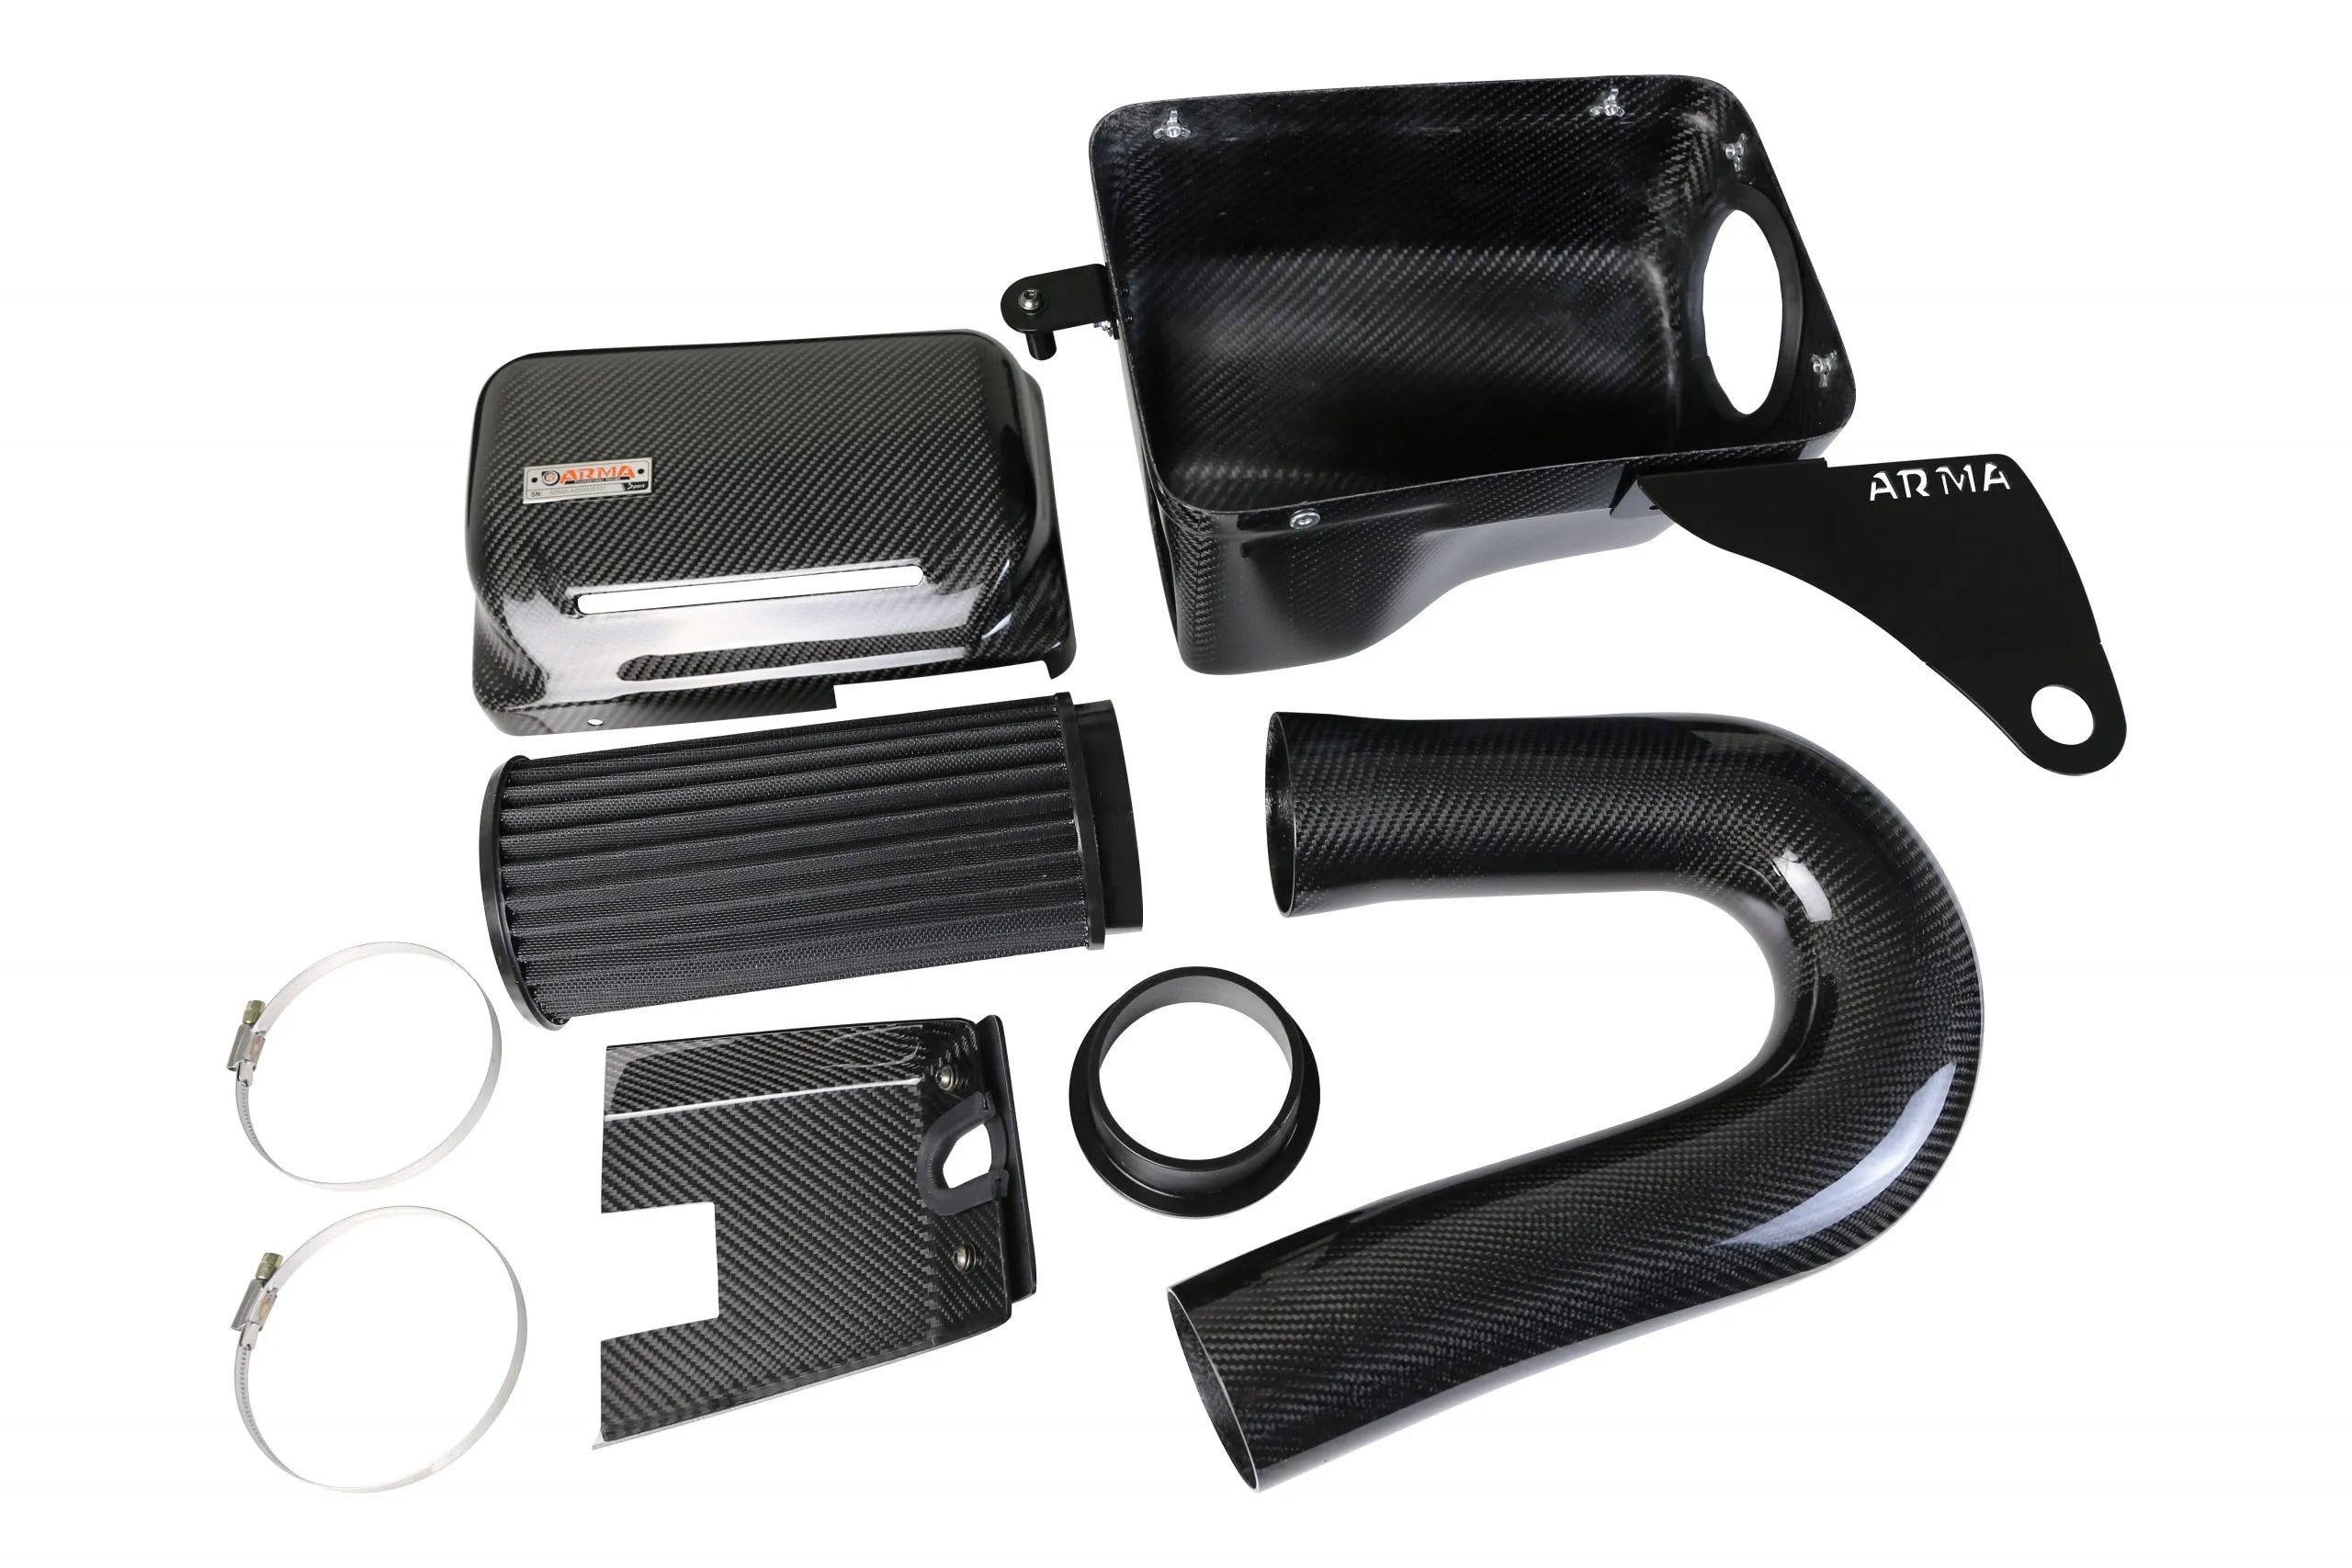 BMW 3 Series N20 Carbon Fibre Intake with Air Filter, Manufactured by ARMASPEED. Carbon Fibre Intake is Designed to perfectly fit the N20 328I Engine Models in the 3 Series F3X Shape. This Carbon Fibre Intake Kit is the perfect addition to increase flow and performance in your N20 3 Series 328I Models. 